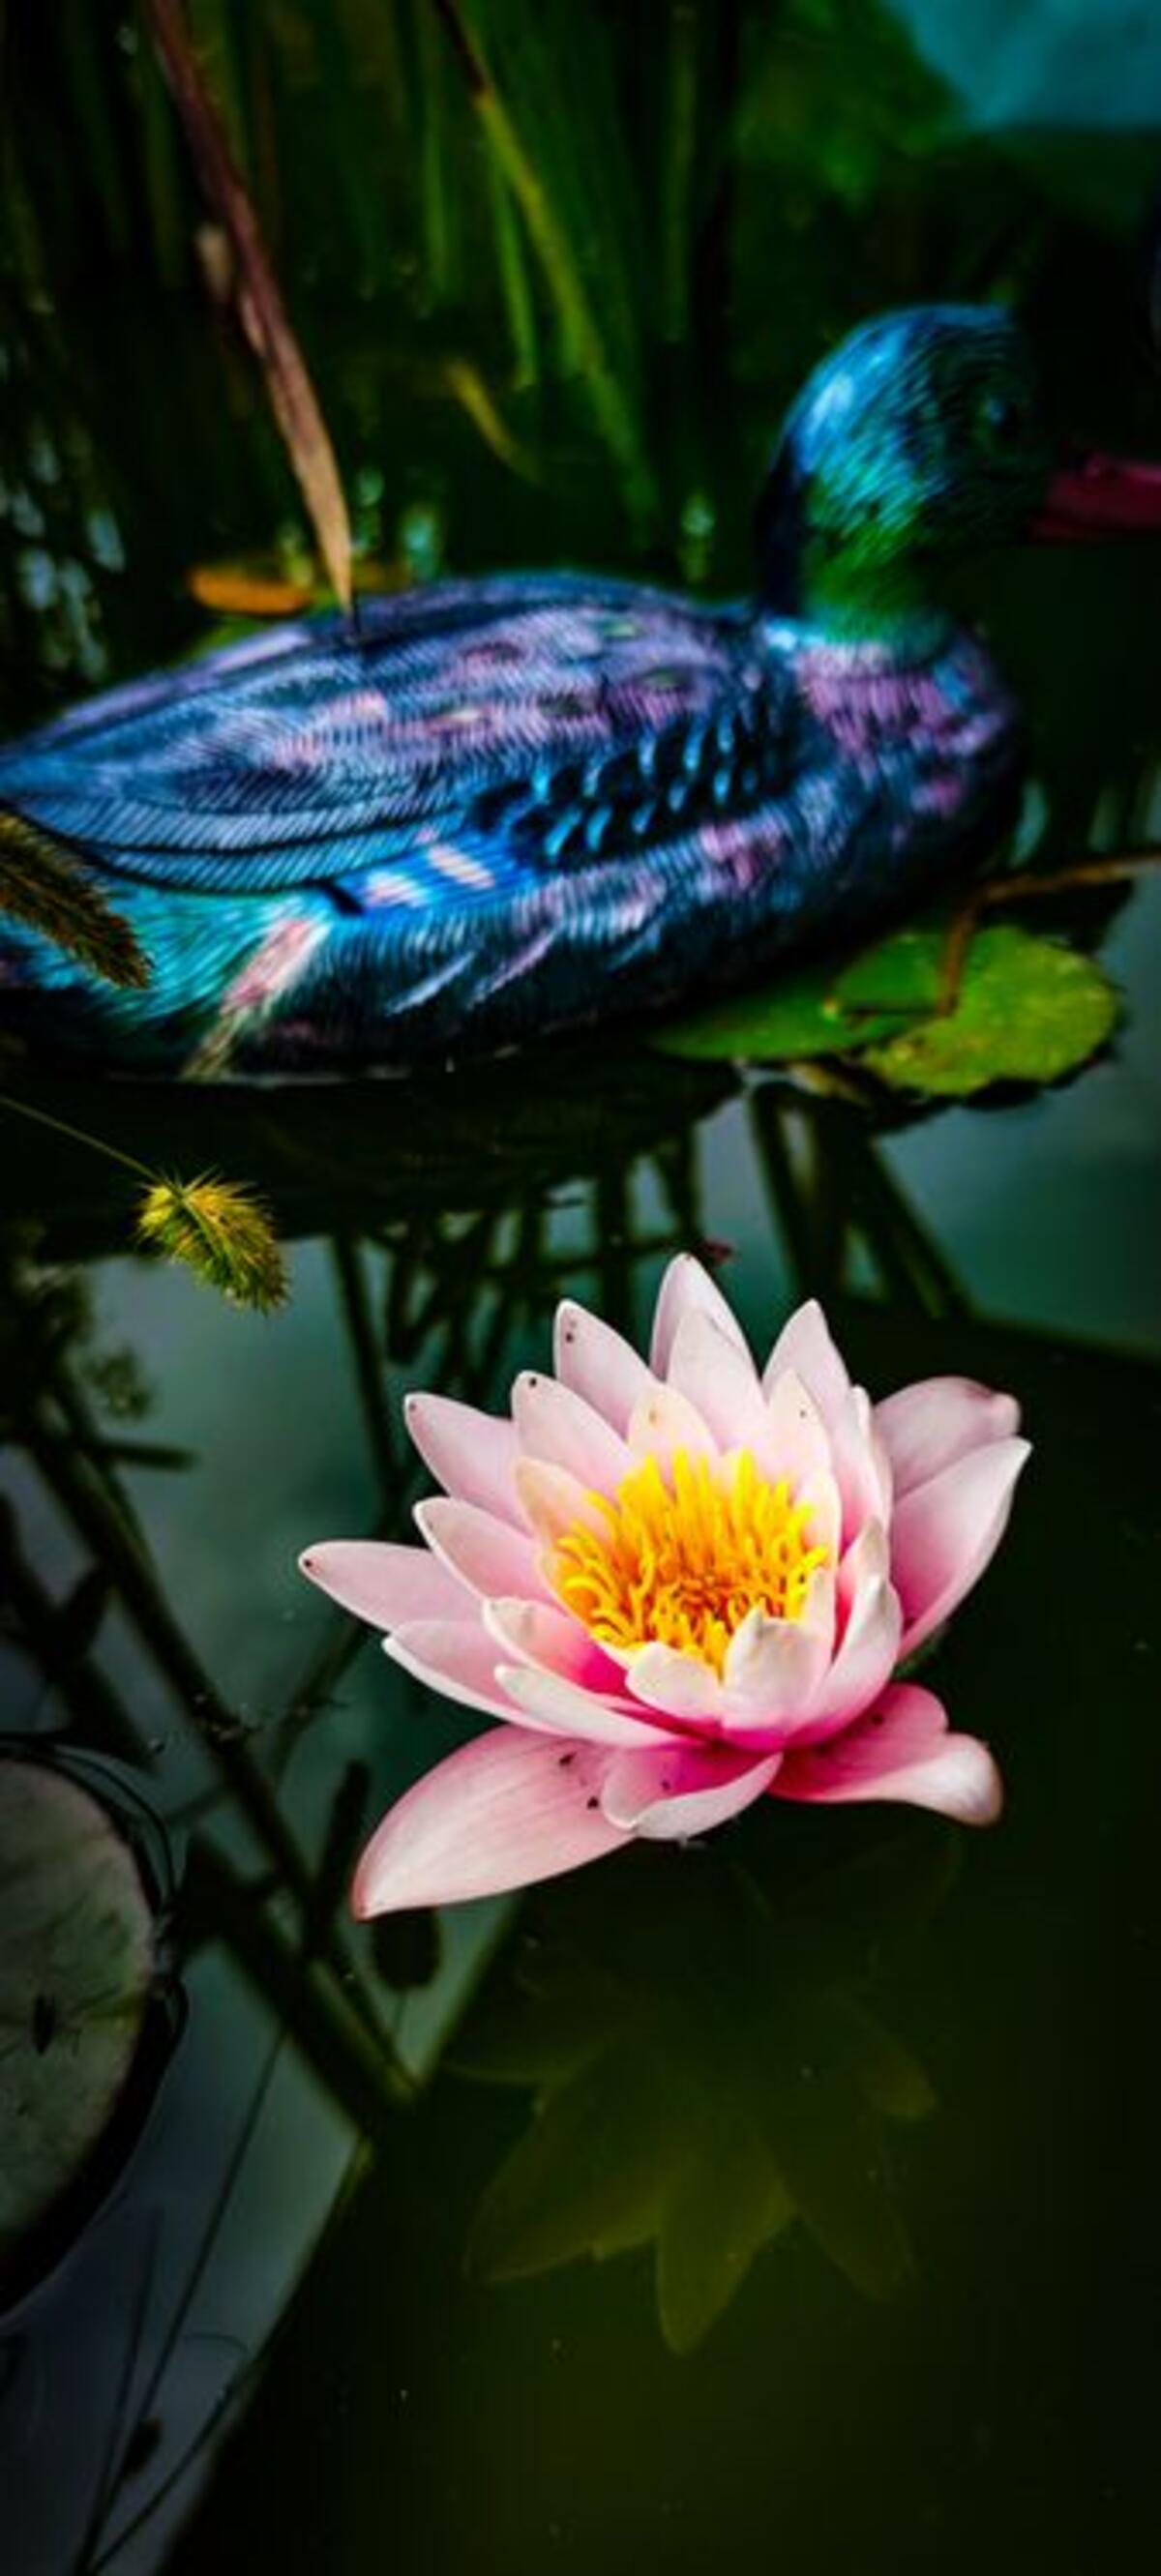 Water lily. Pond plants. Water lily. Pond.